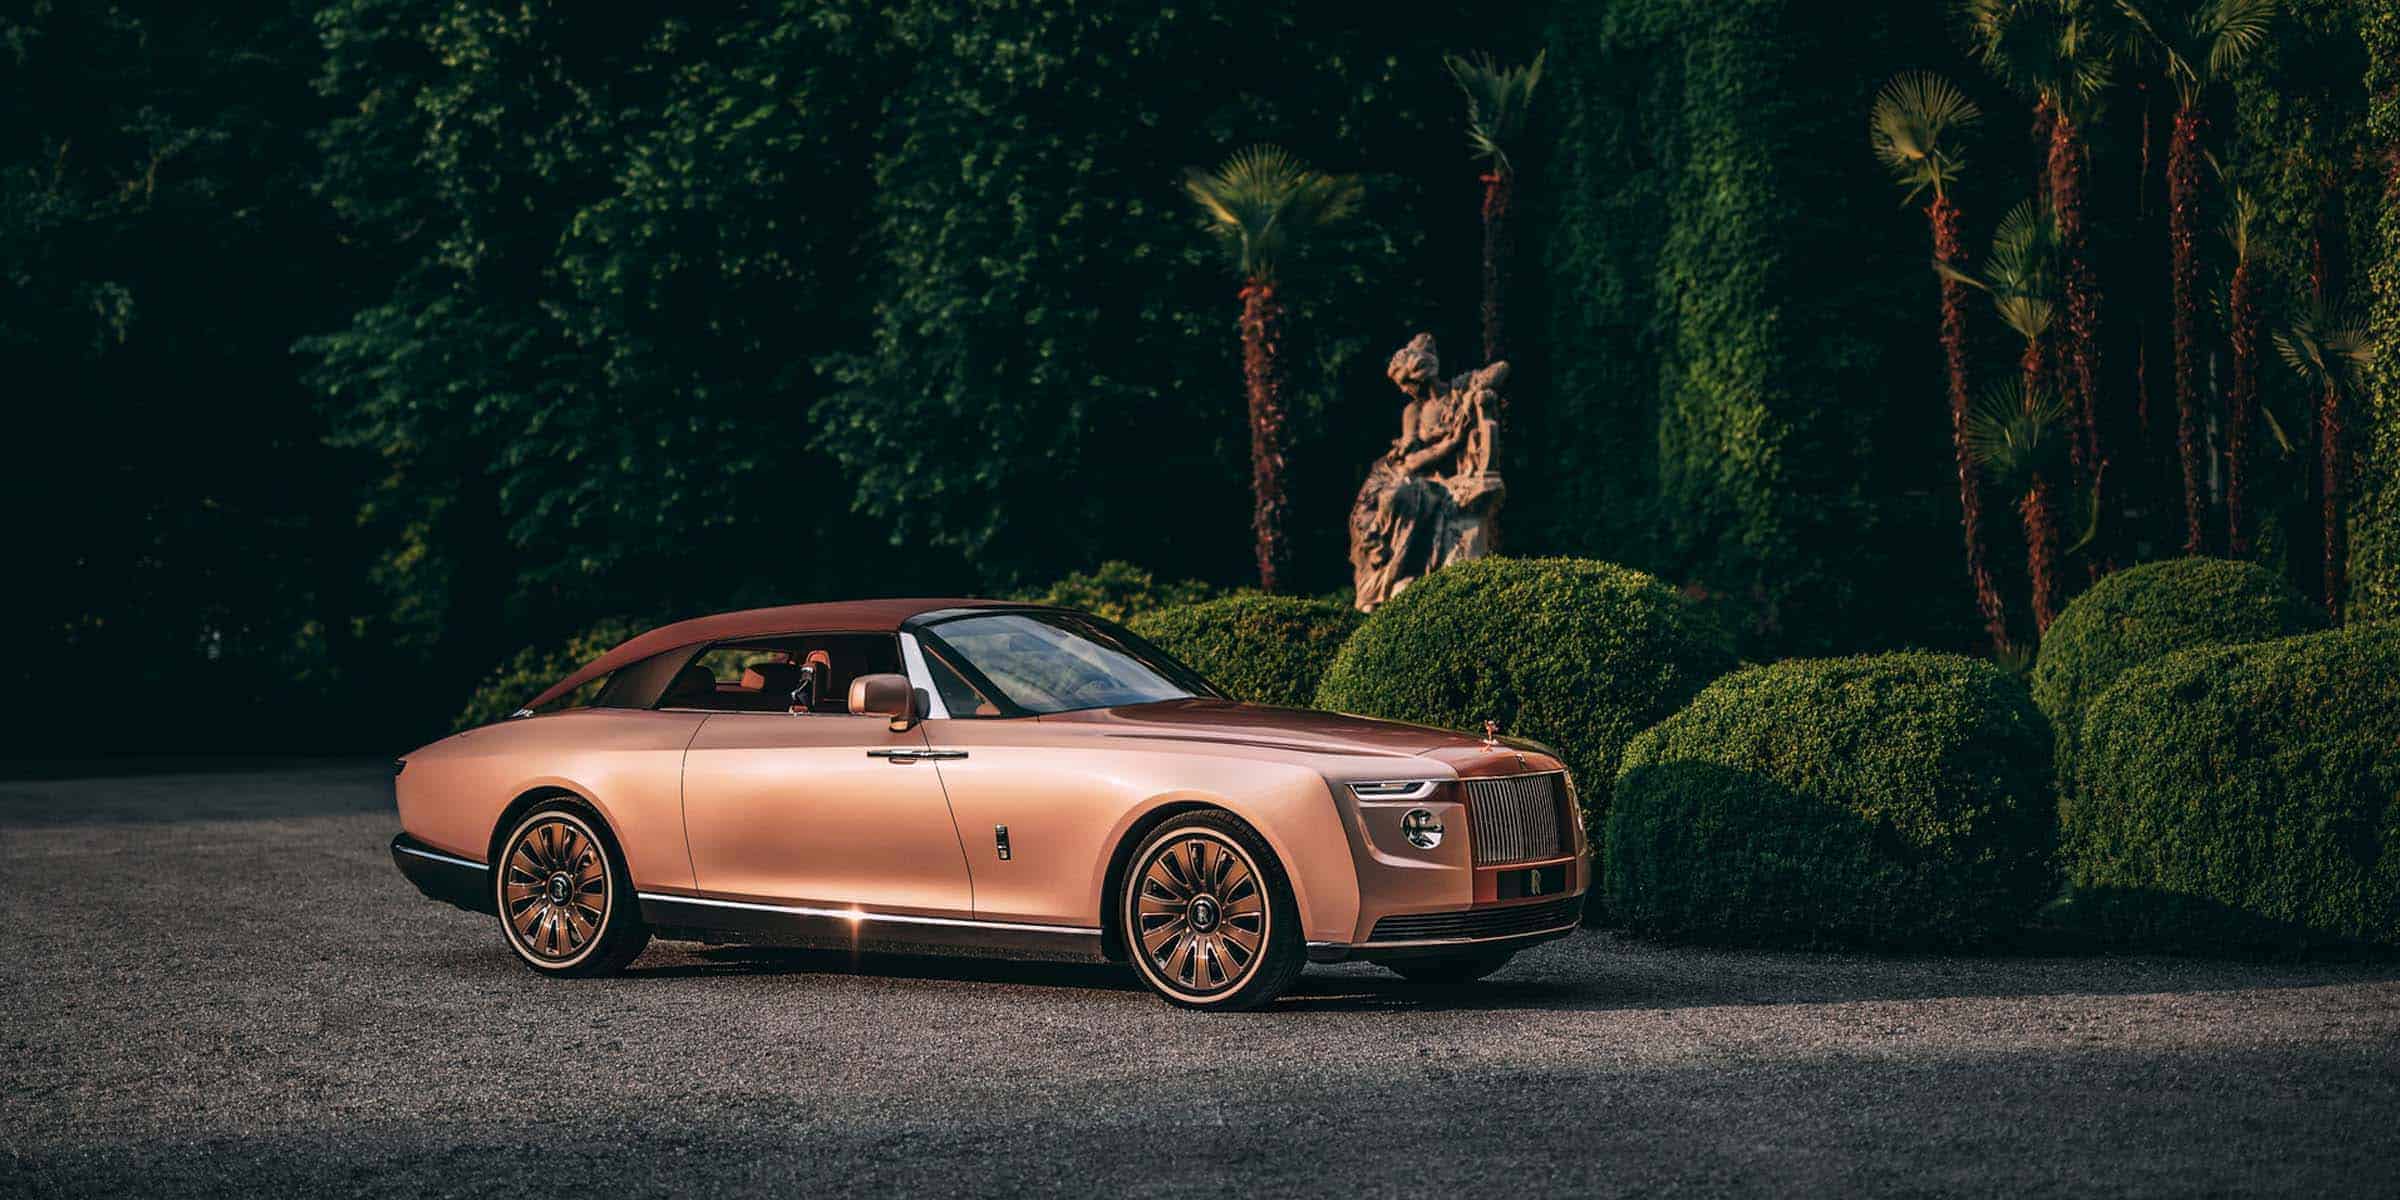 Top 15 Luxury Automotive Brands That Are Dominating the Digital Space